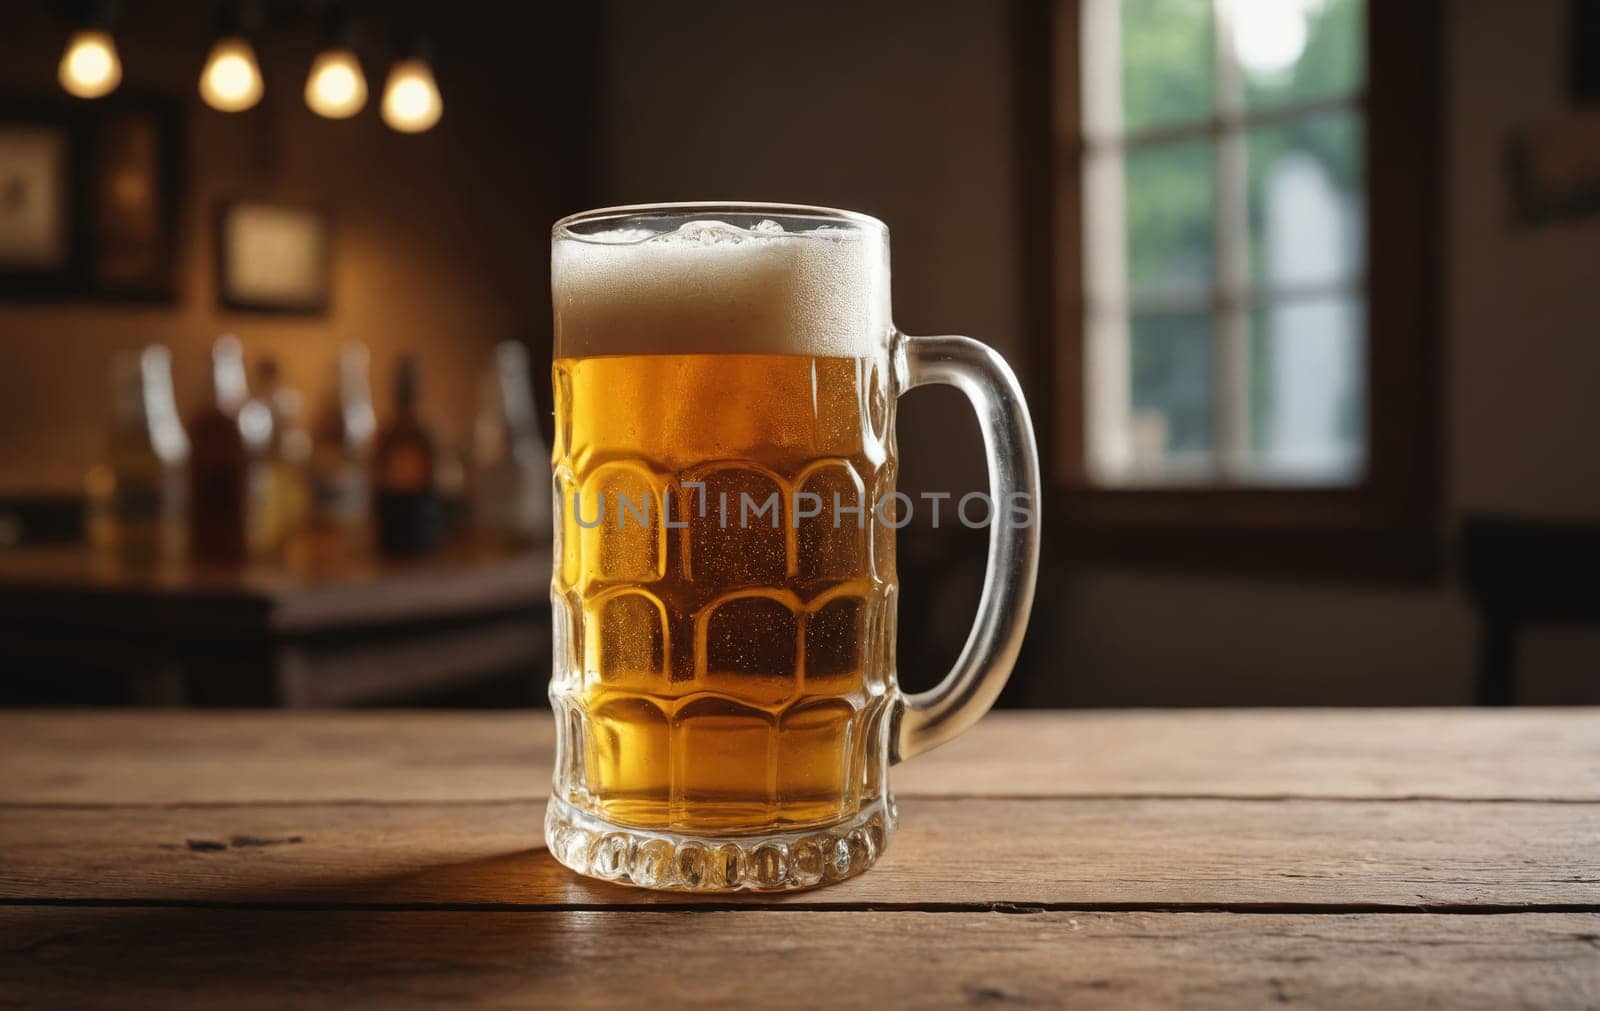 A beer glass filled with liquid is resting on a wooden table. The tableware holds a refreshing drink, creating a cozy barware scene